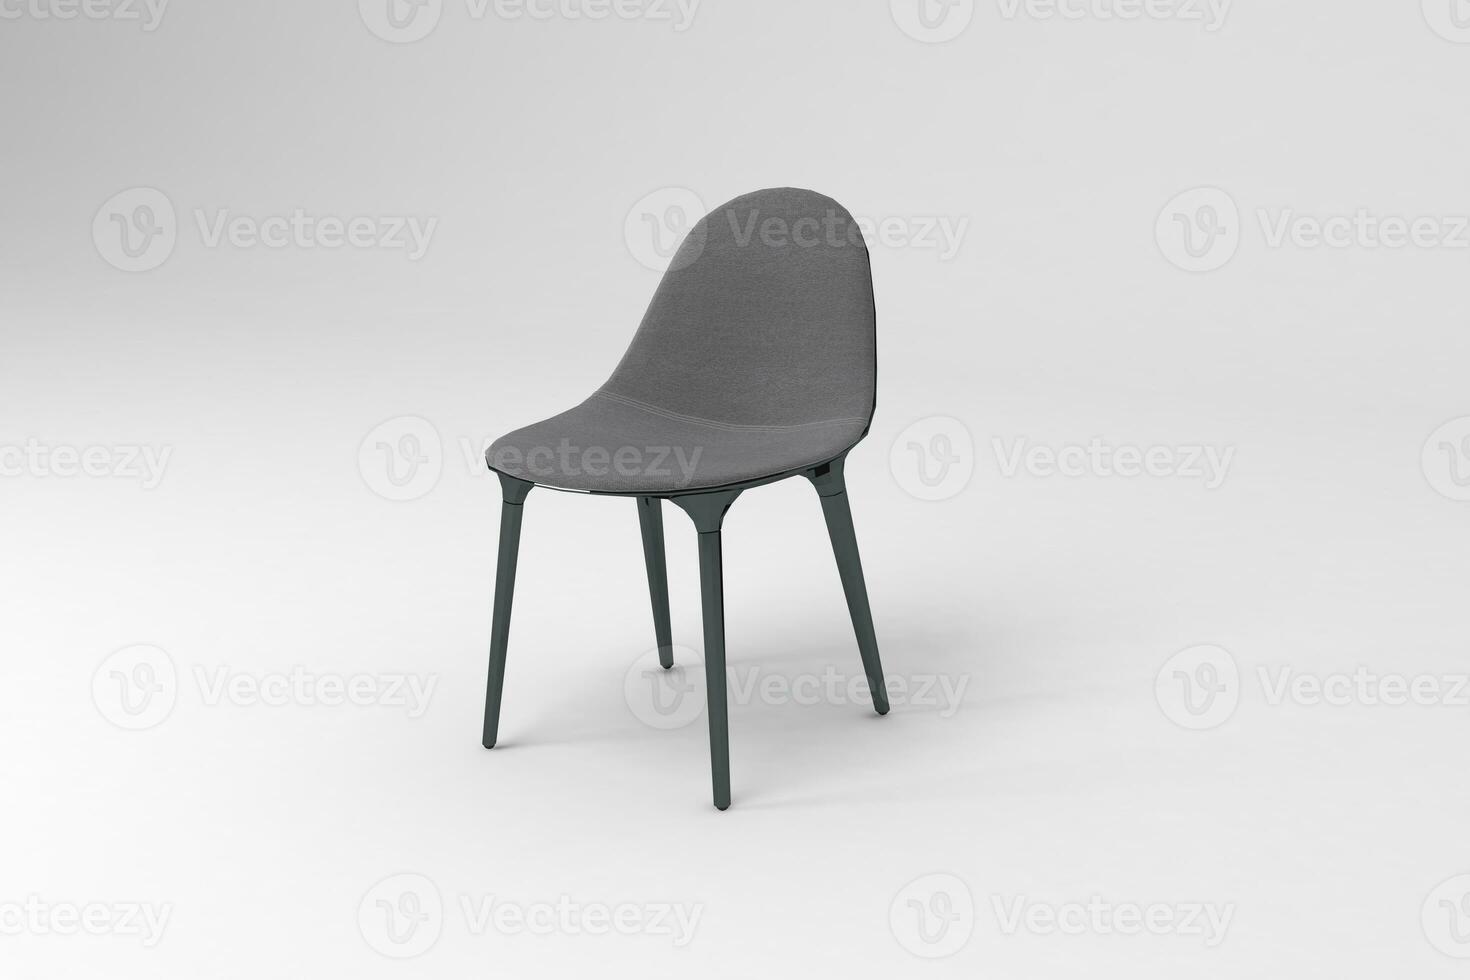 Perspective view, Modern Chair, minimal concept, Studio shot of stylish chair isolated on white background 3d rendering photo